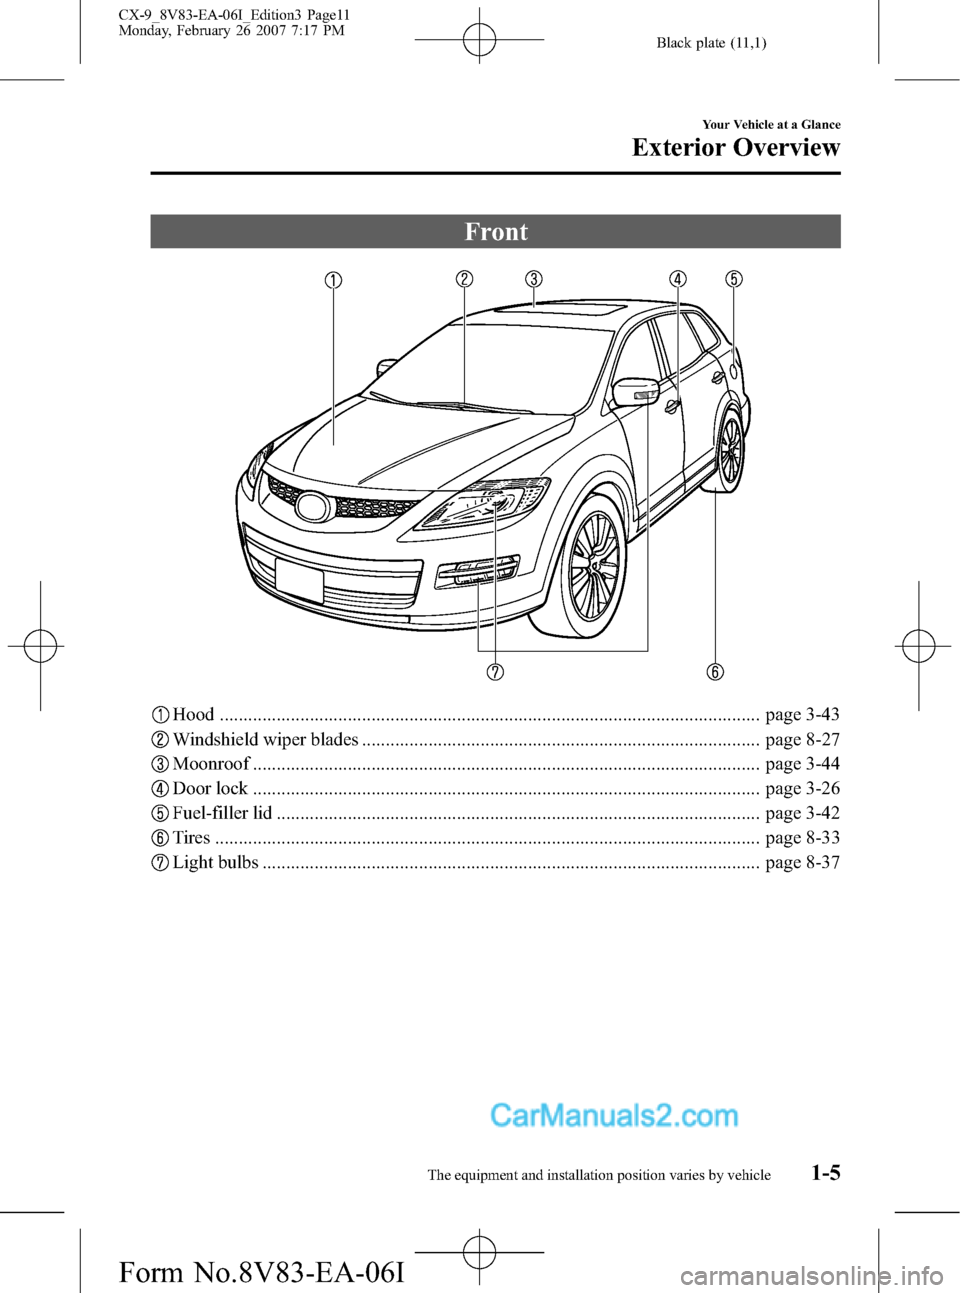 MAZDA MODEL CX-9 2007  Owners Manual (in English) Black plate (11,1)
Front
Hood .................................................................................................................. page 3-43
Windshield wiper blades .....................